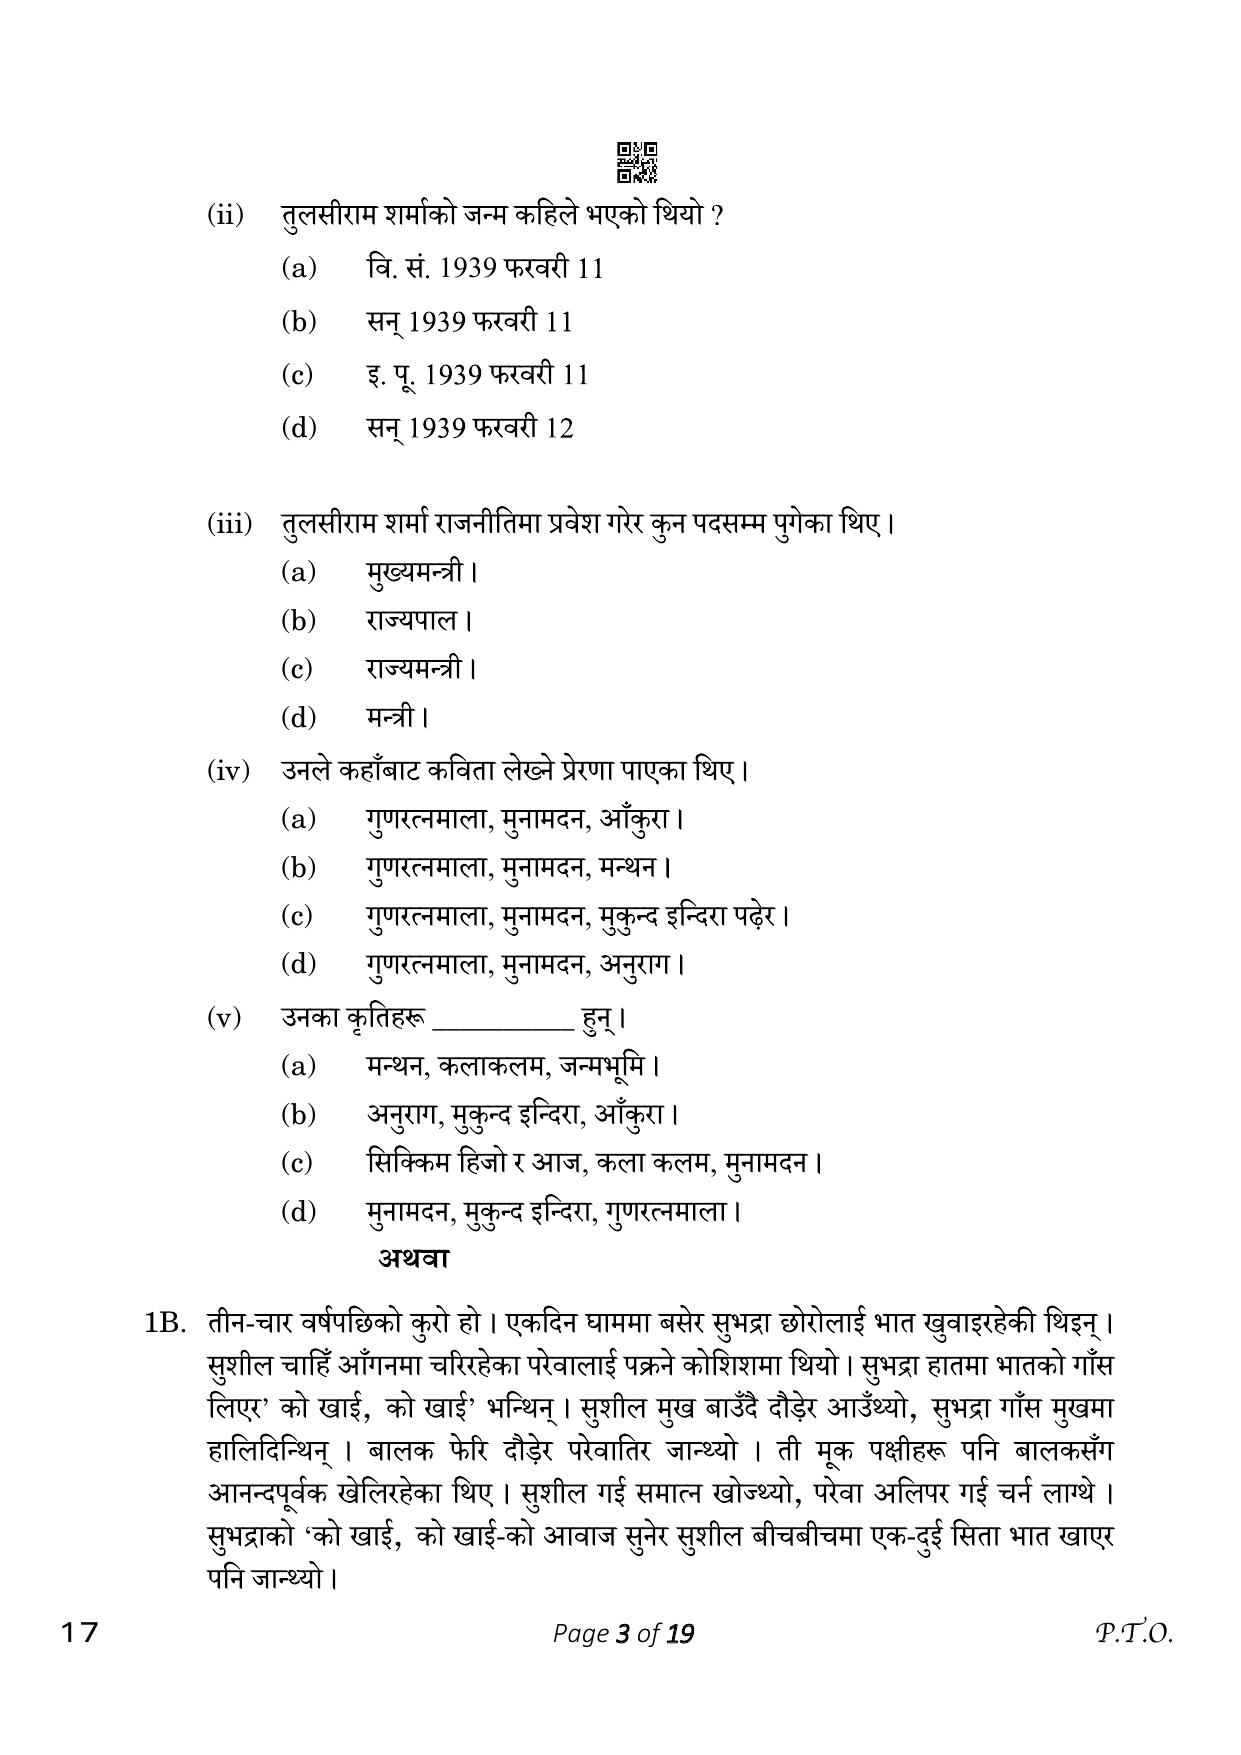 CBSE Class 10 Nepali (Compartment) 2023 Question Paper - Page 3